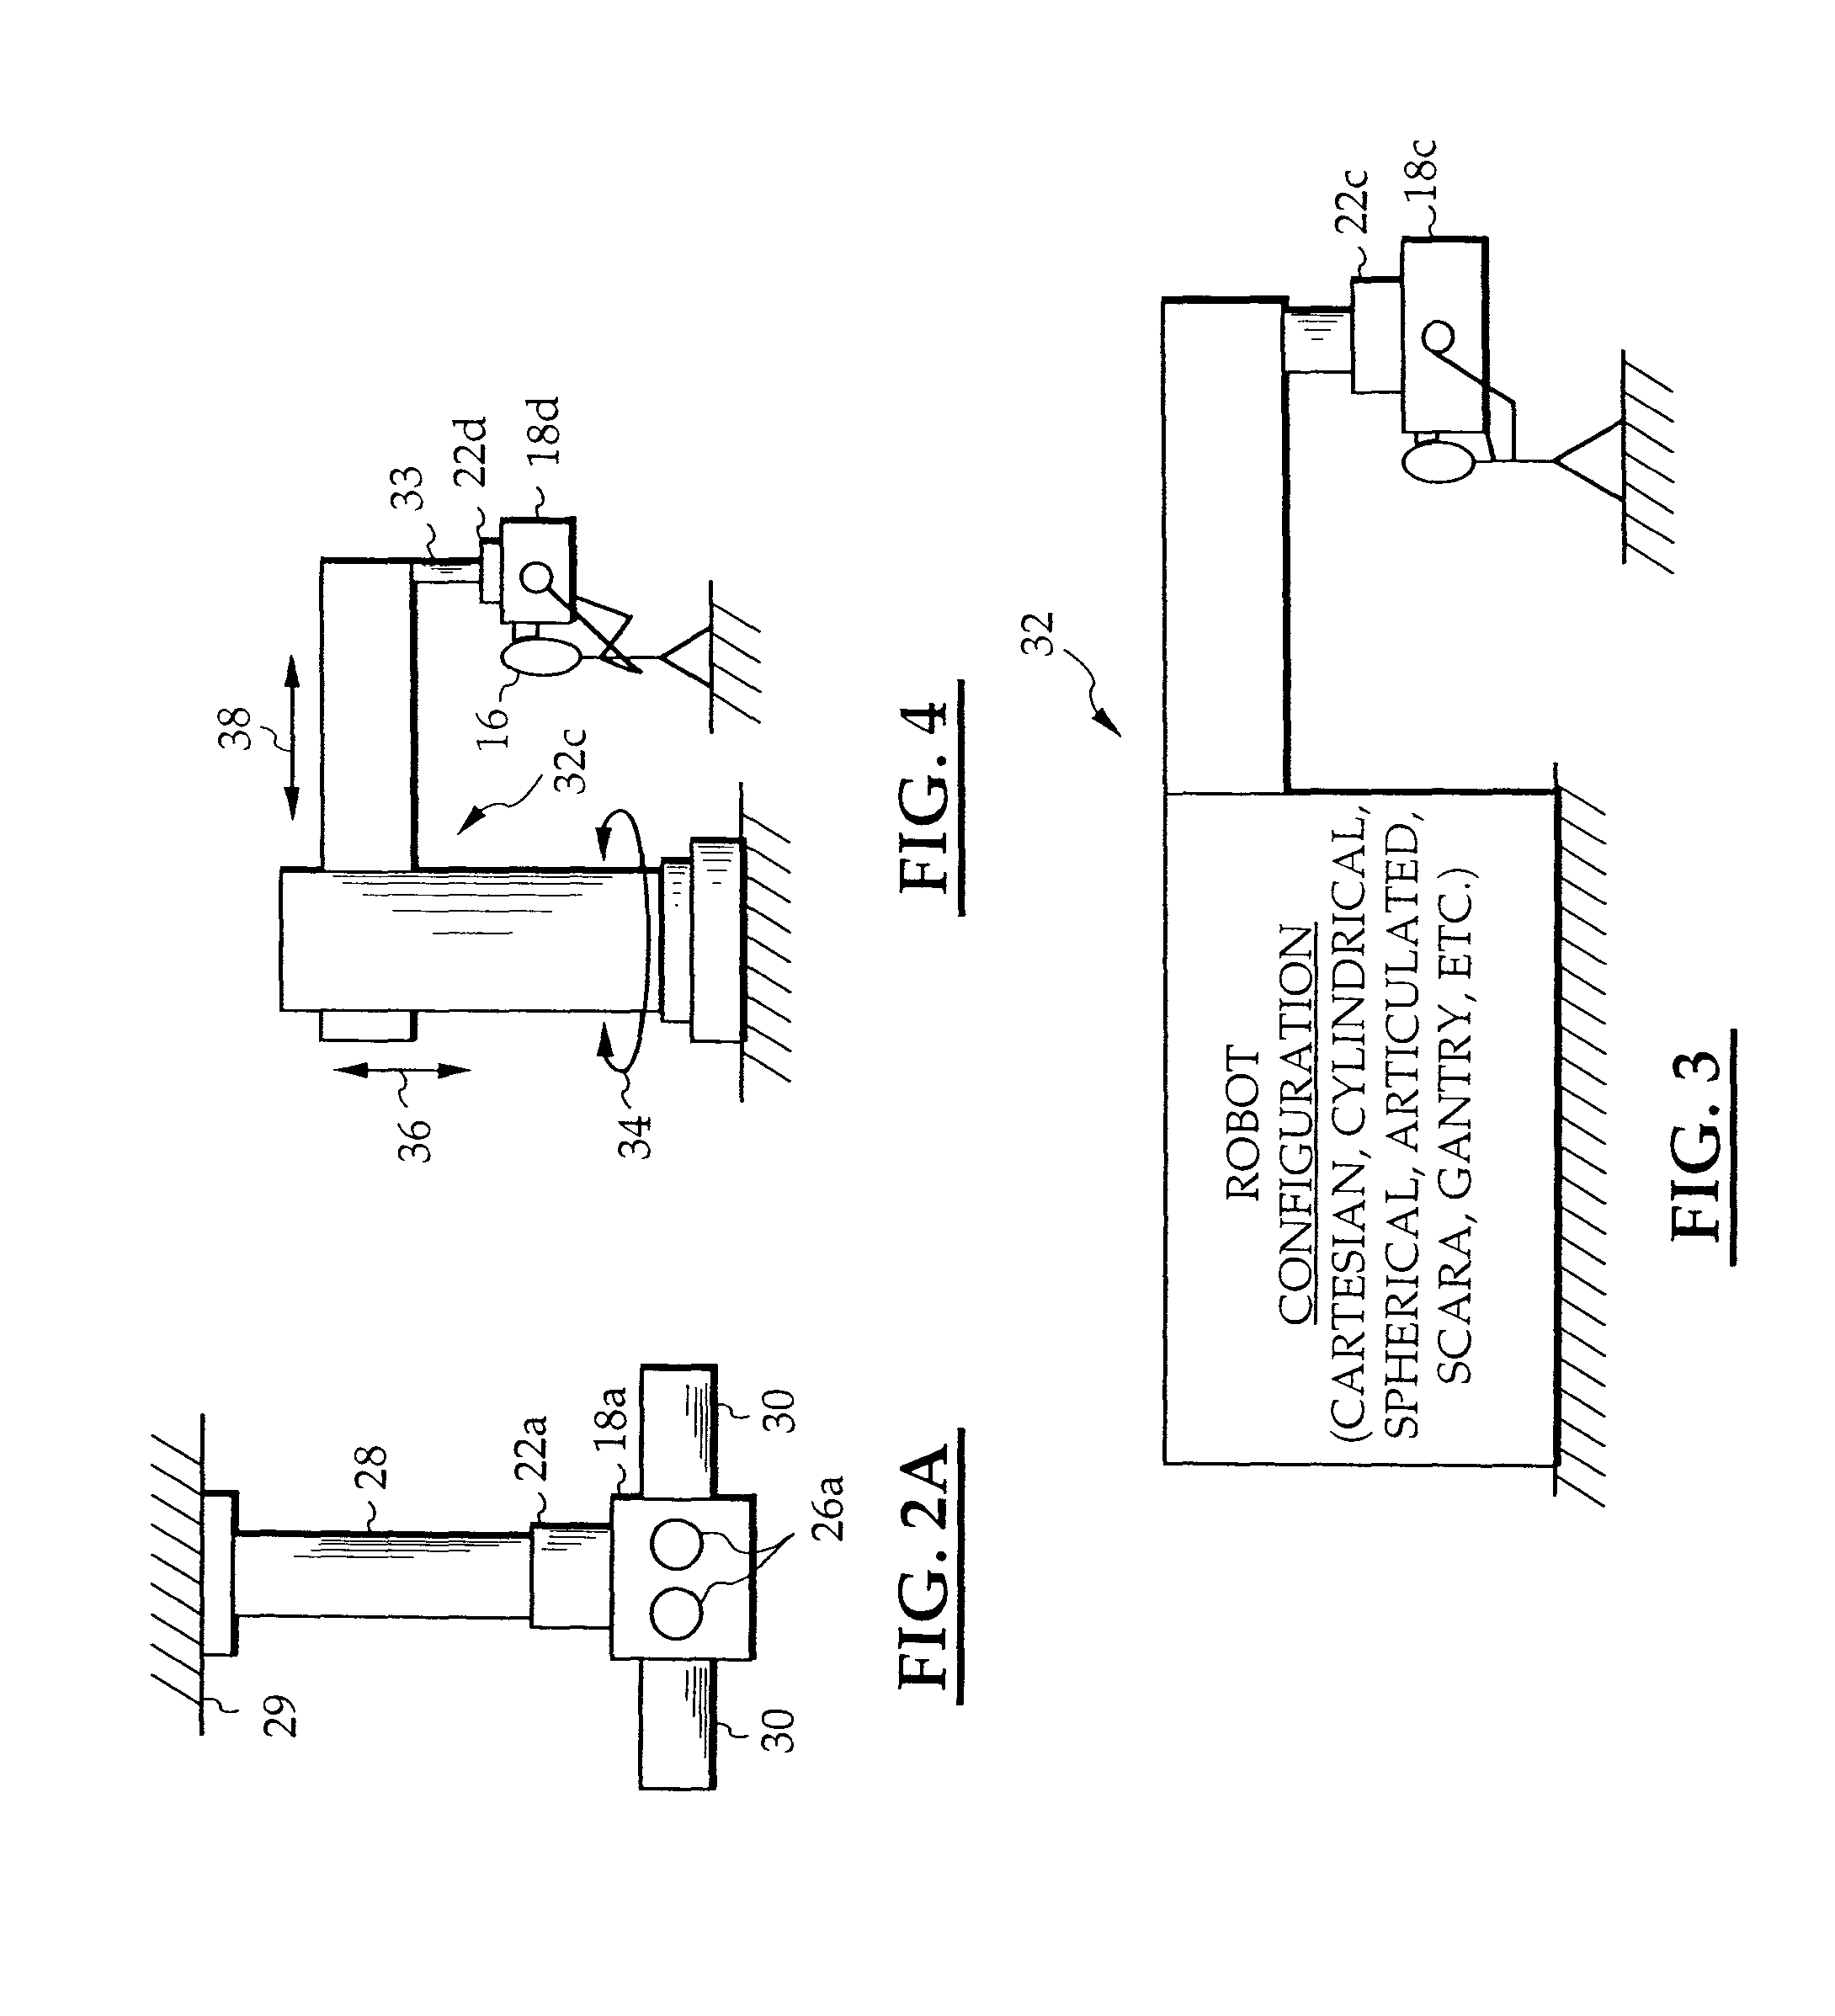 Method and apparatus for producing and storing, on a resultant non-transitory storage medium, computer generated (CG) video in correspondence with images acquired by an image acquisition device tracked in motion with respect to a 3D reference frame